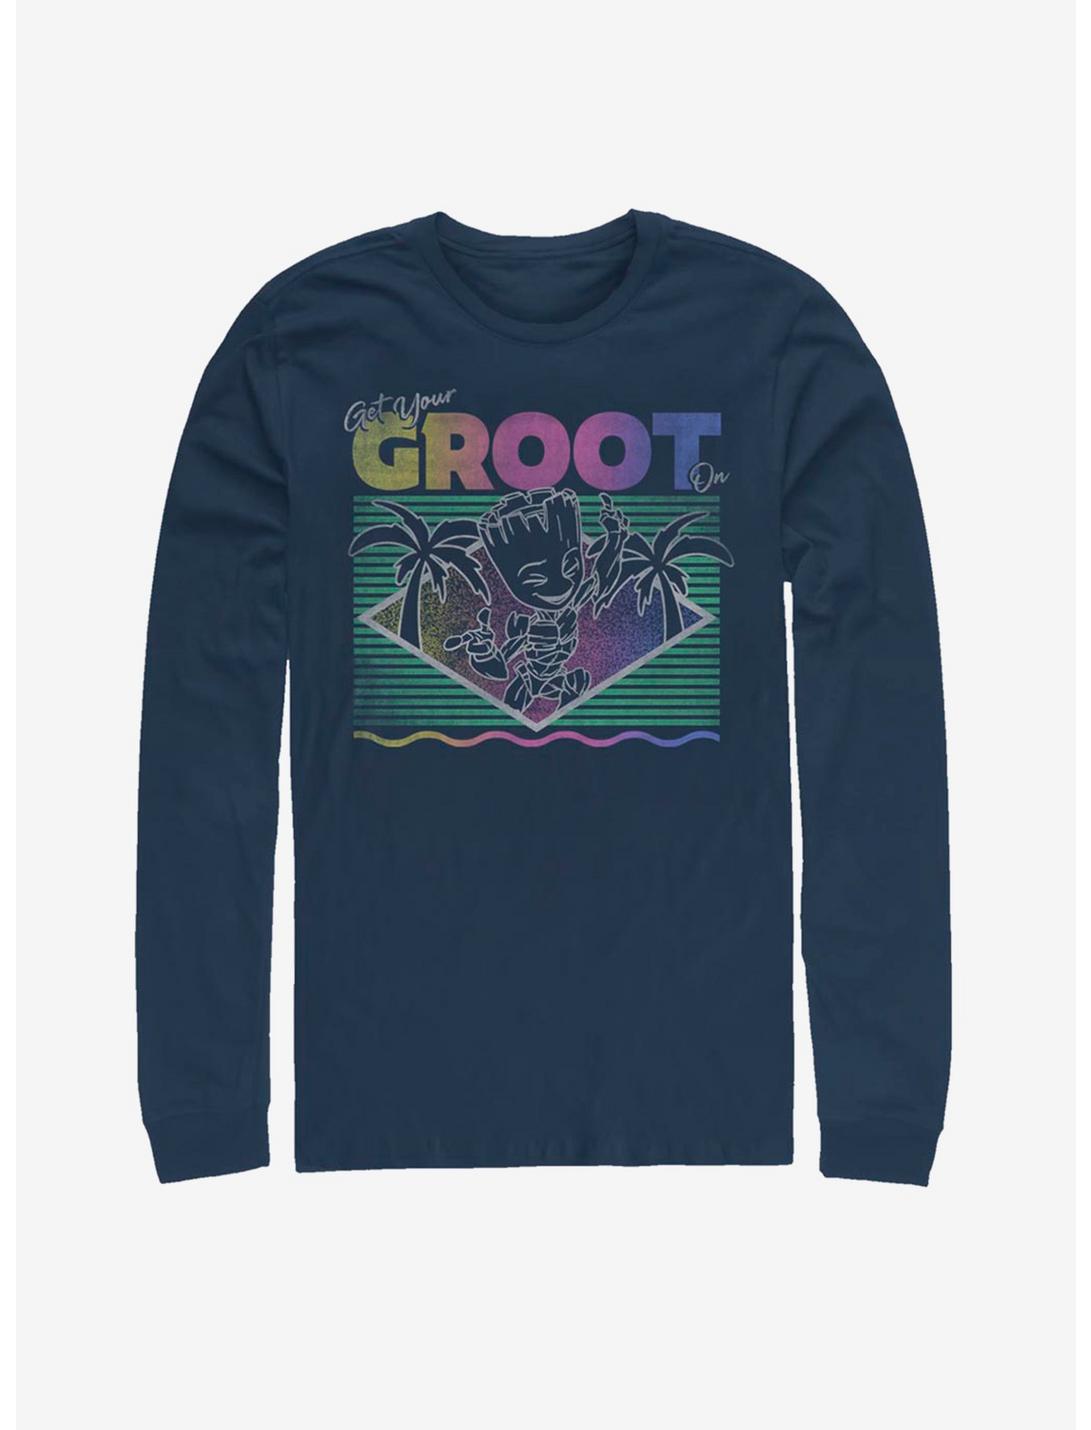 Marvel Guardians Of The Galaxy Get Your Groot On Long-Sleeve T-Shirt, NAVY, hi-res